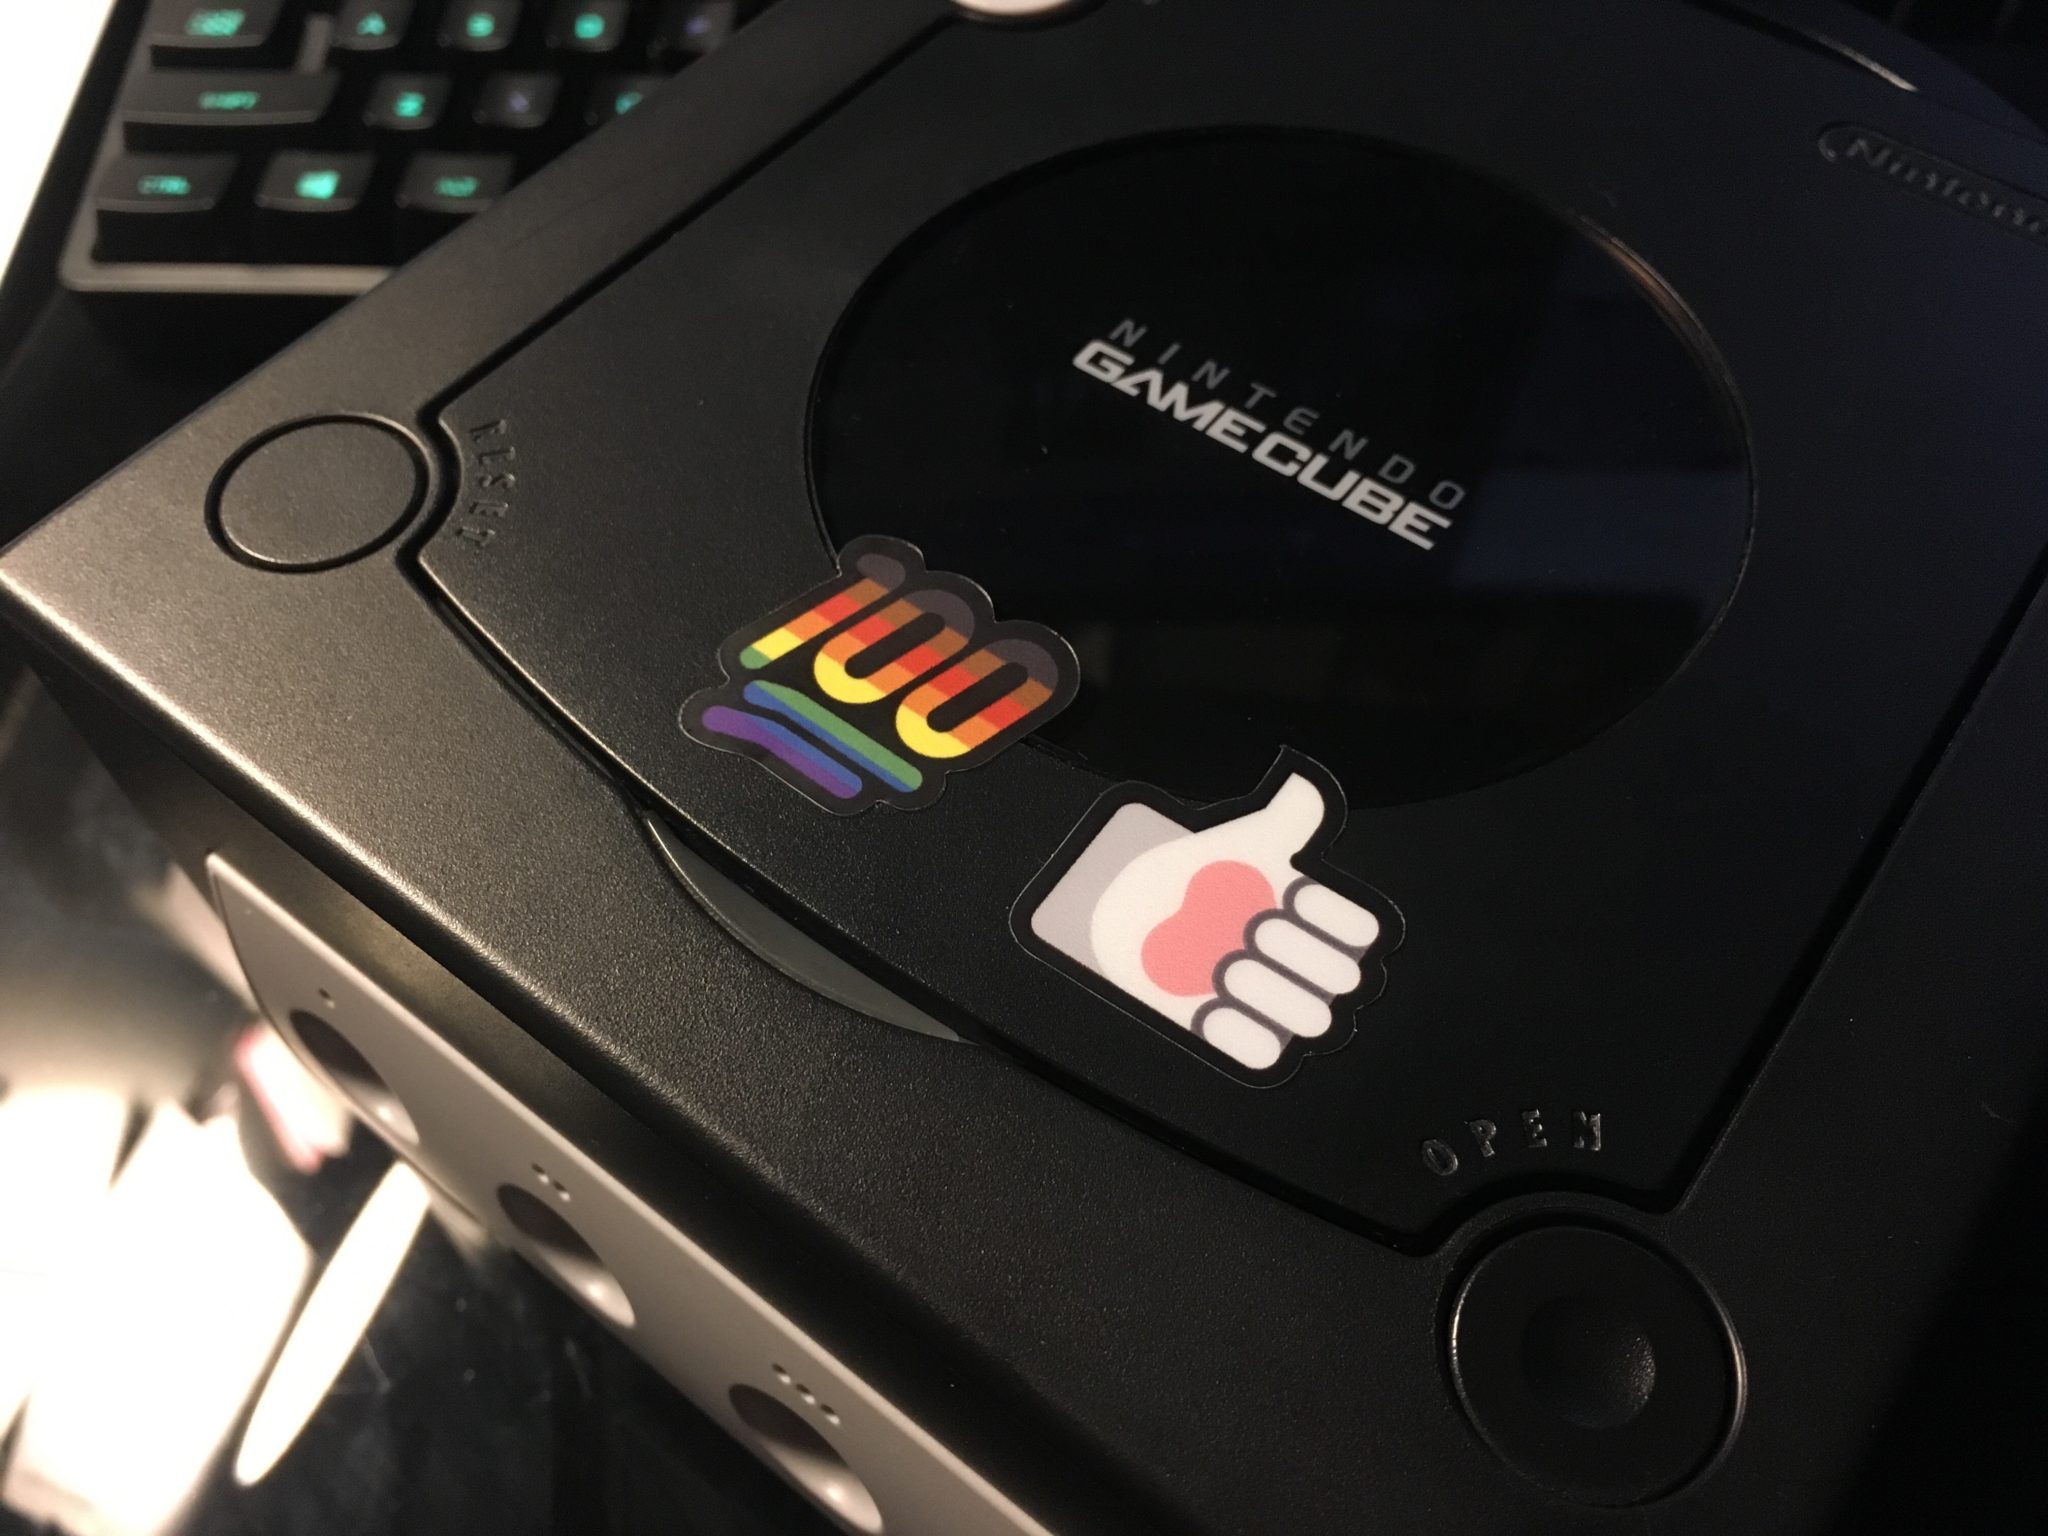 A pride 100 and a paw thumbs up sticker stuck on the lower part of the disc tray cover on a black Nintendo GameCube.